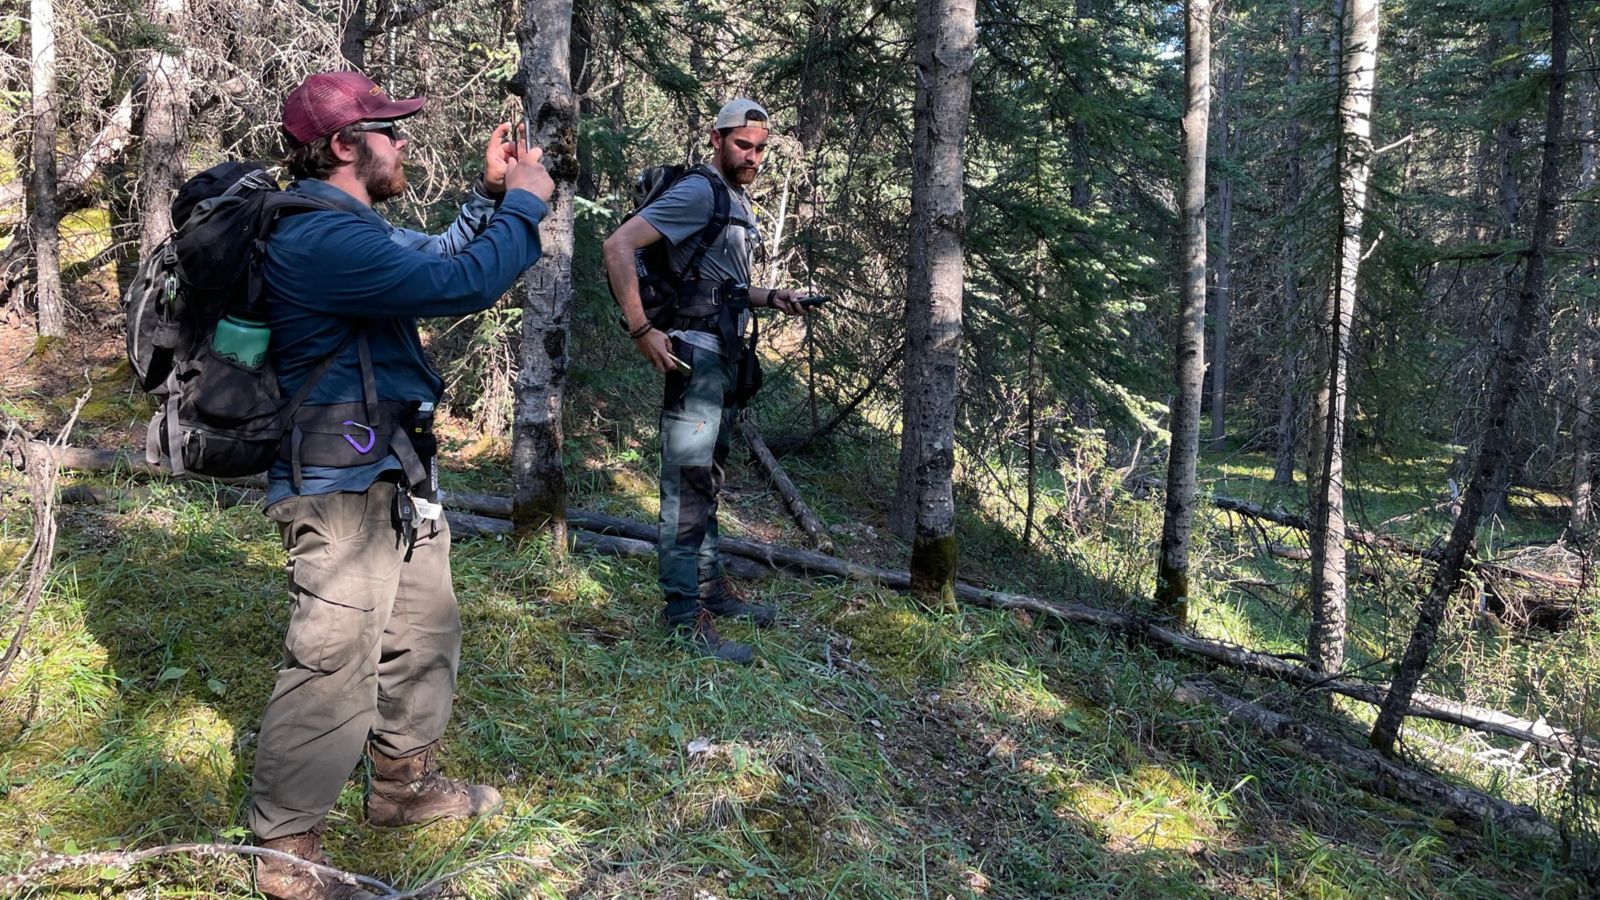 Graduate students Jared Randall (left) and Carter Kuiper with the Wildfire Analytics Team document vegetation around the community of Nordegg that could fuel a wildfire.